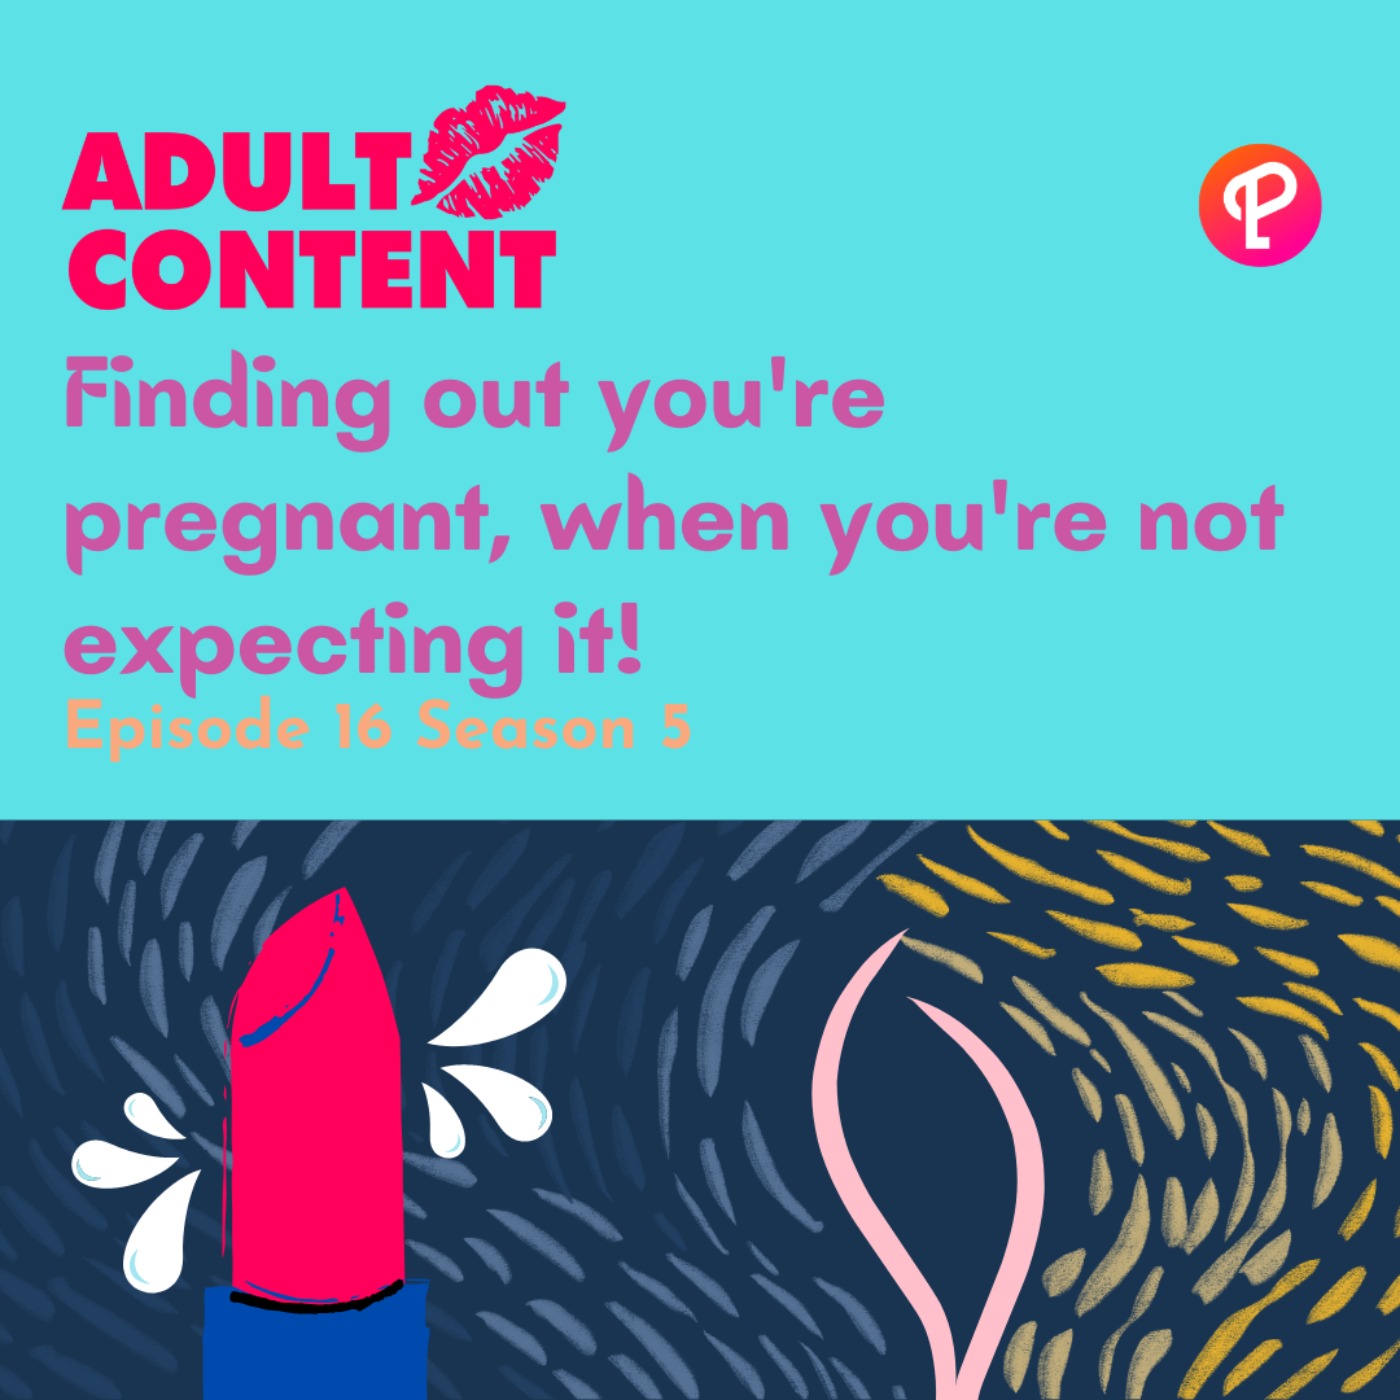 EP 16 S5: Finding out you're pregnant, when you're not expecting it!